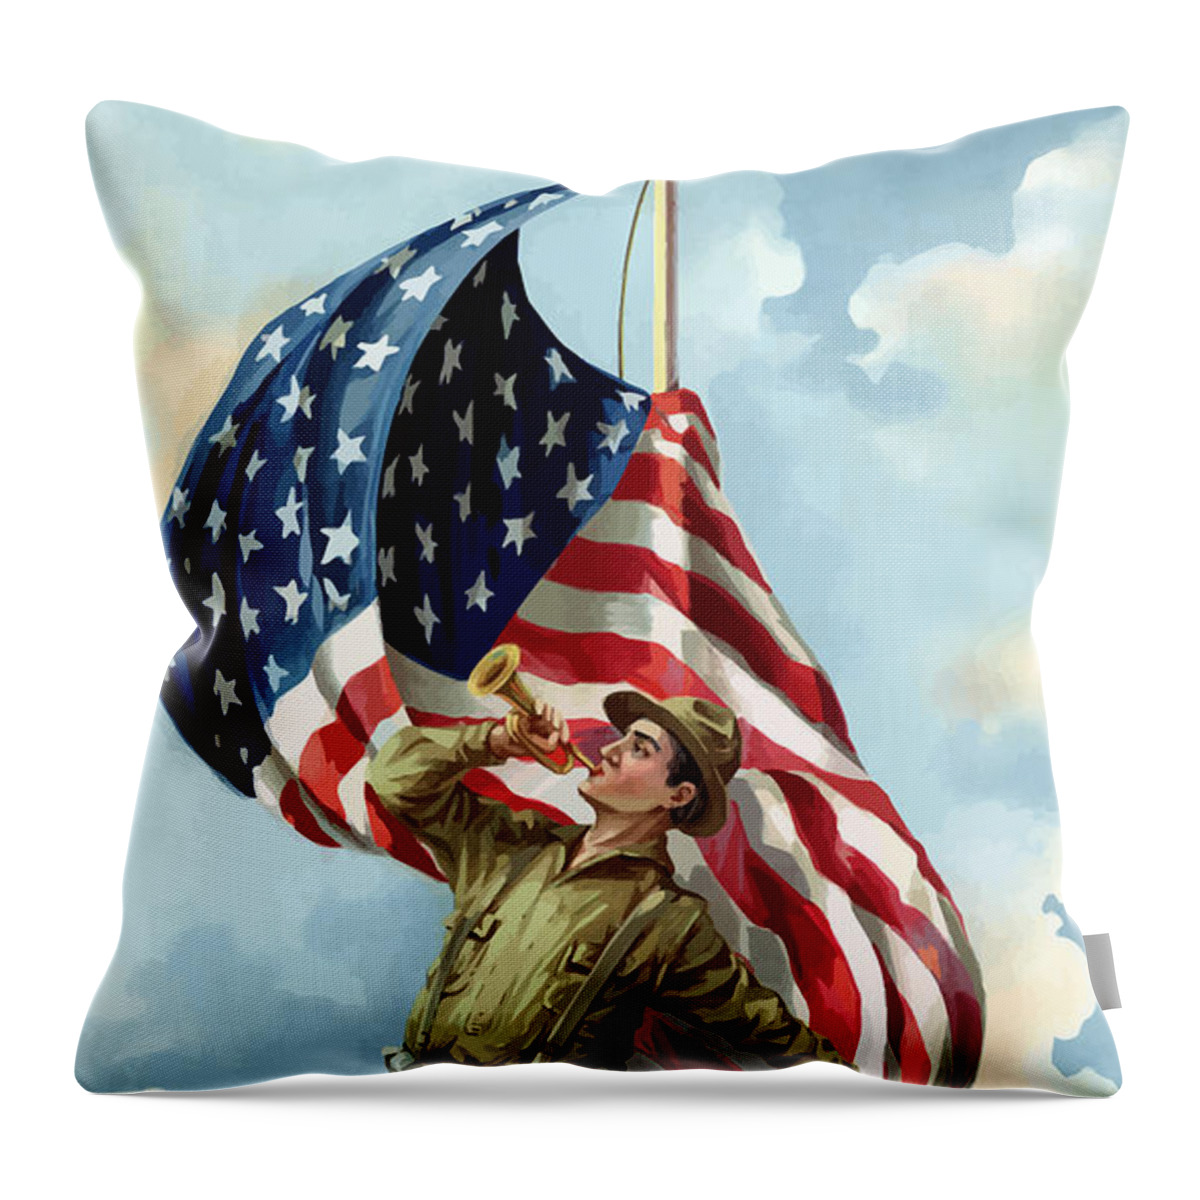 Ww1 Throw Pillow featuring the painting World War One Soldier by War Is Hell Store